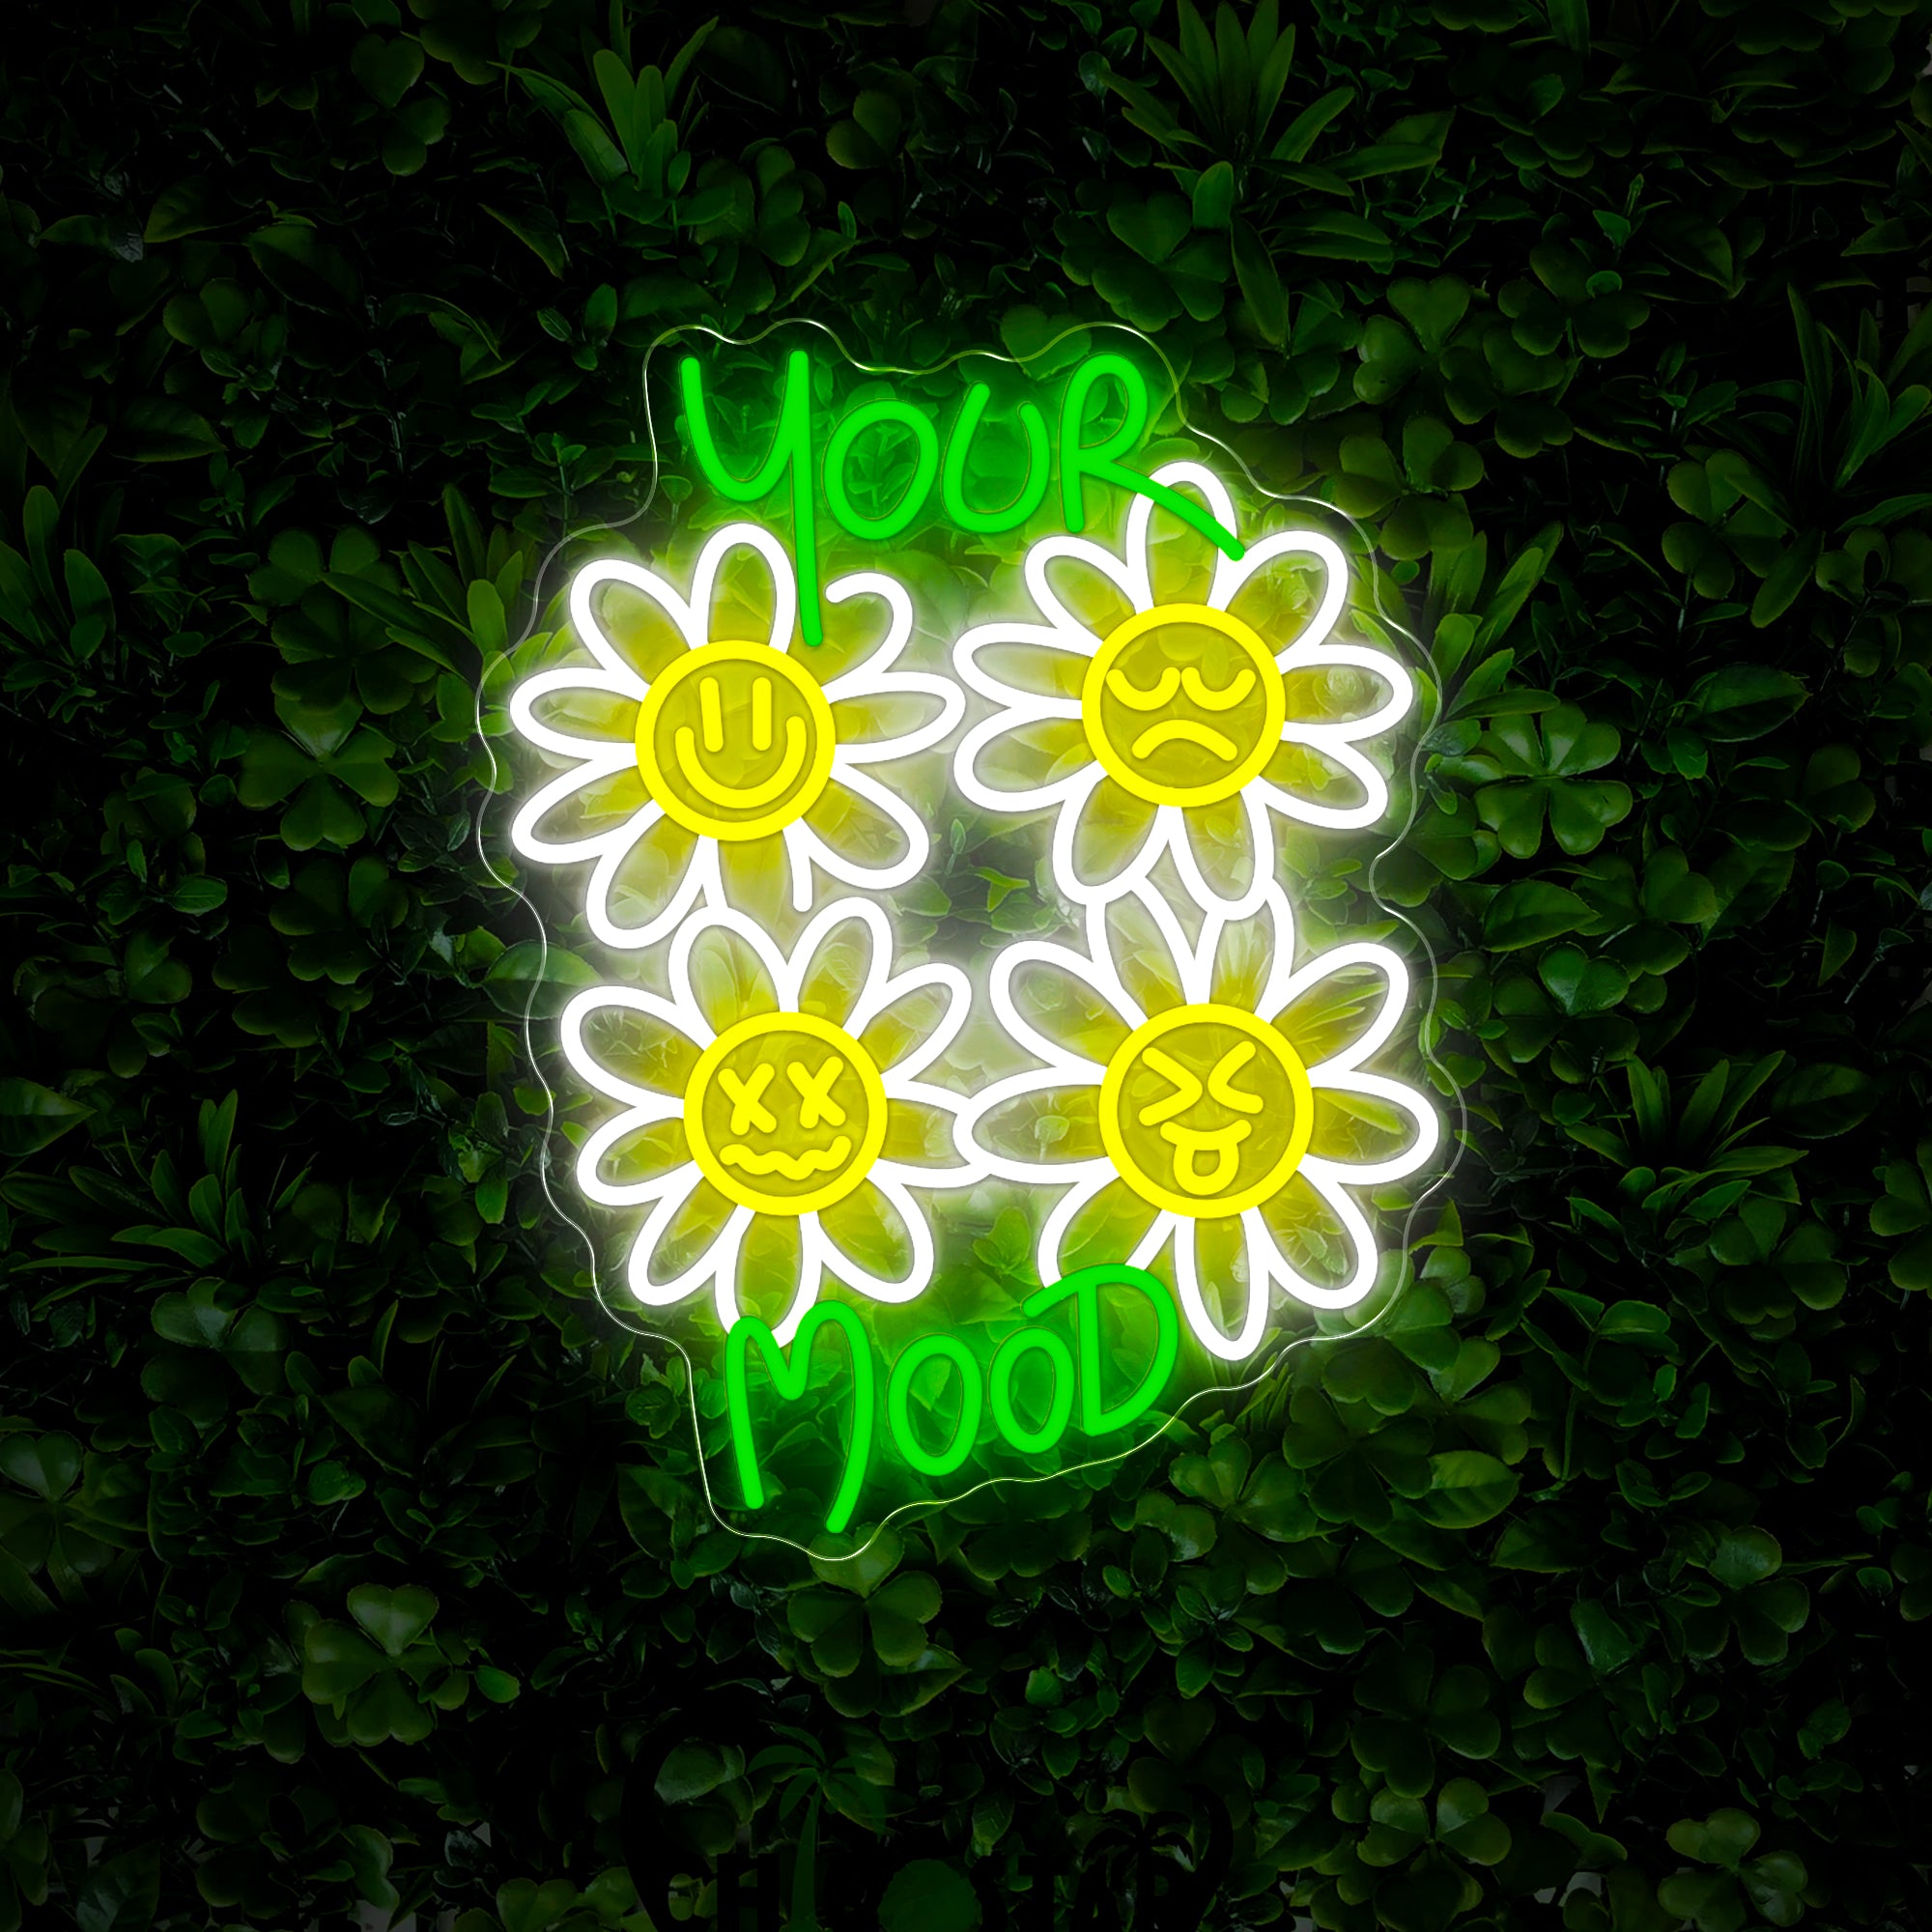 Your Mood Neon Sign